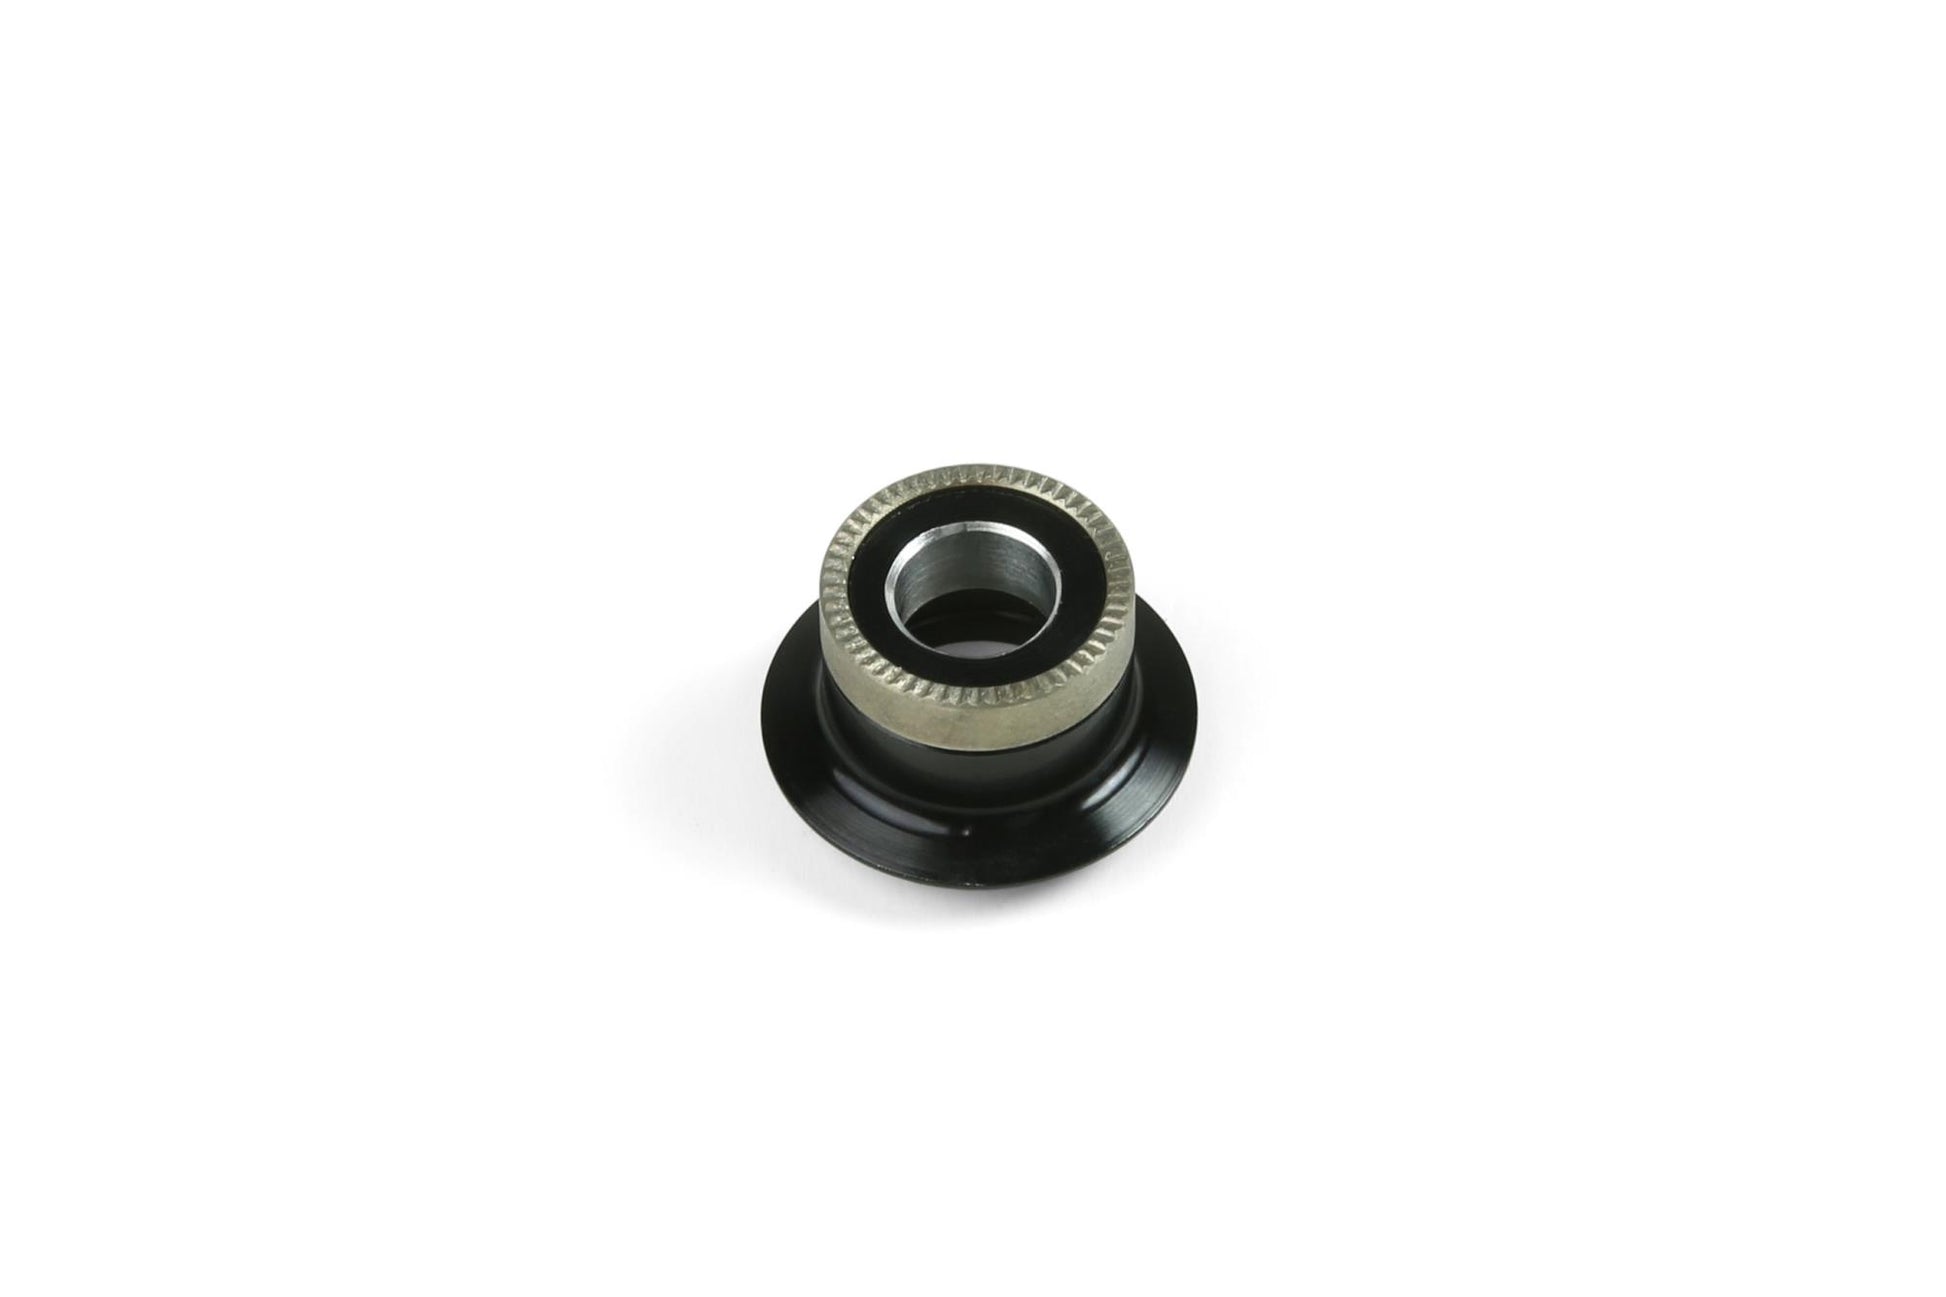 Hope Xc6/Xc3 10mm Non-Drive Spacer - Black